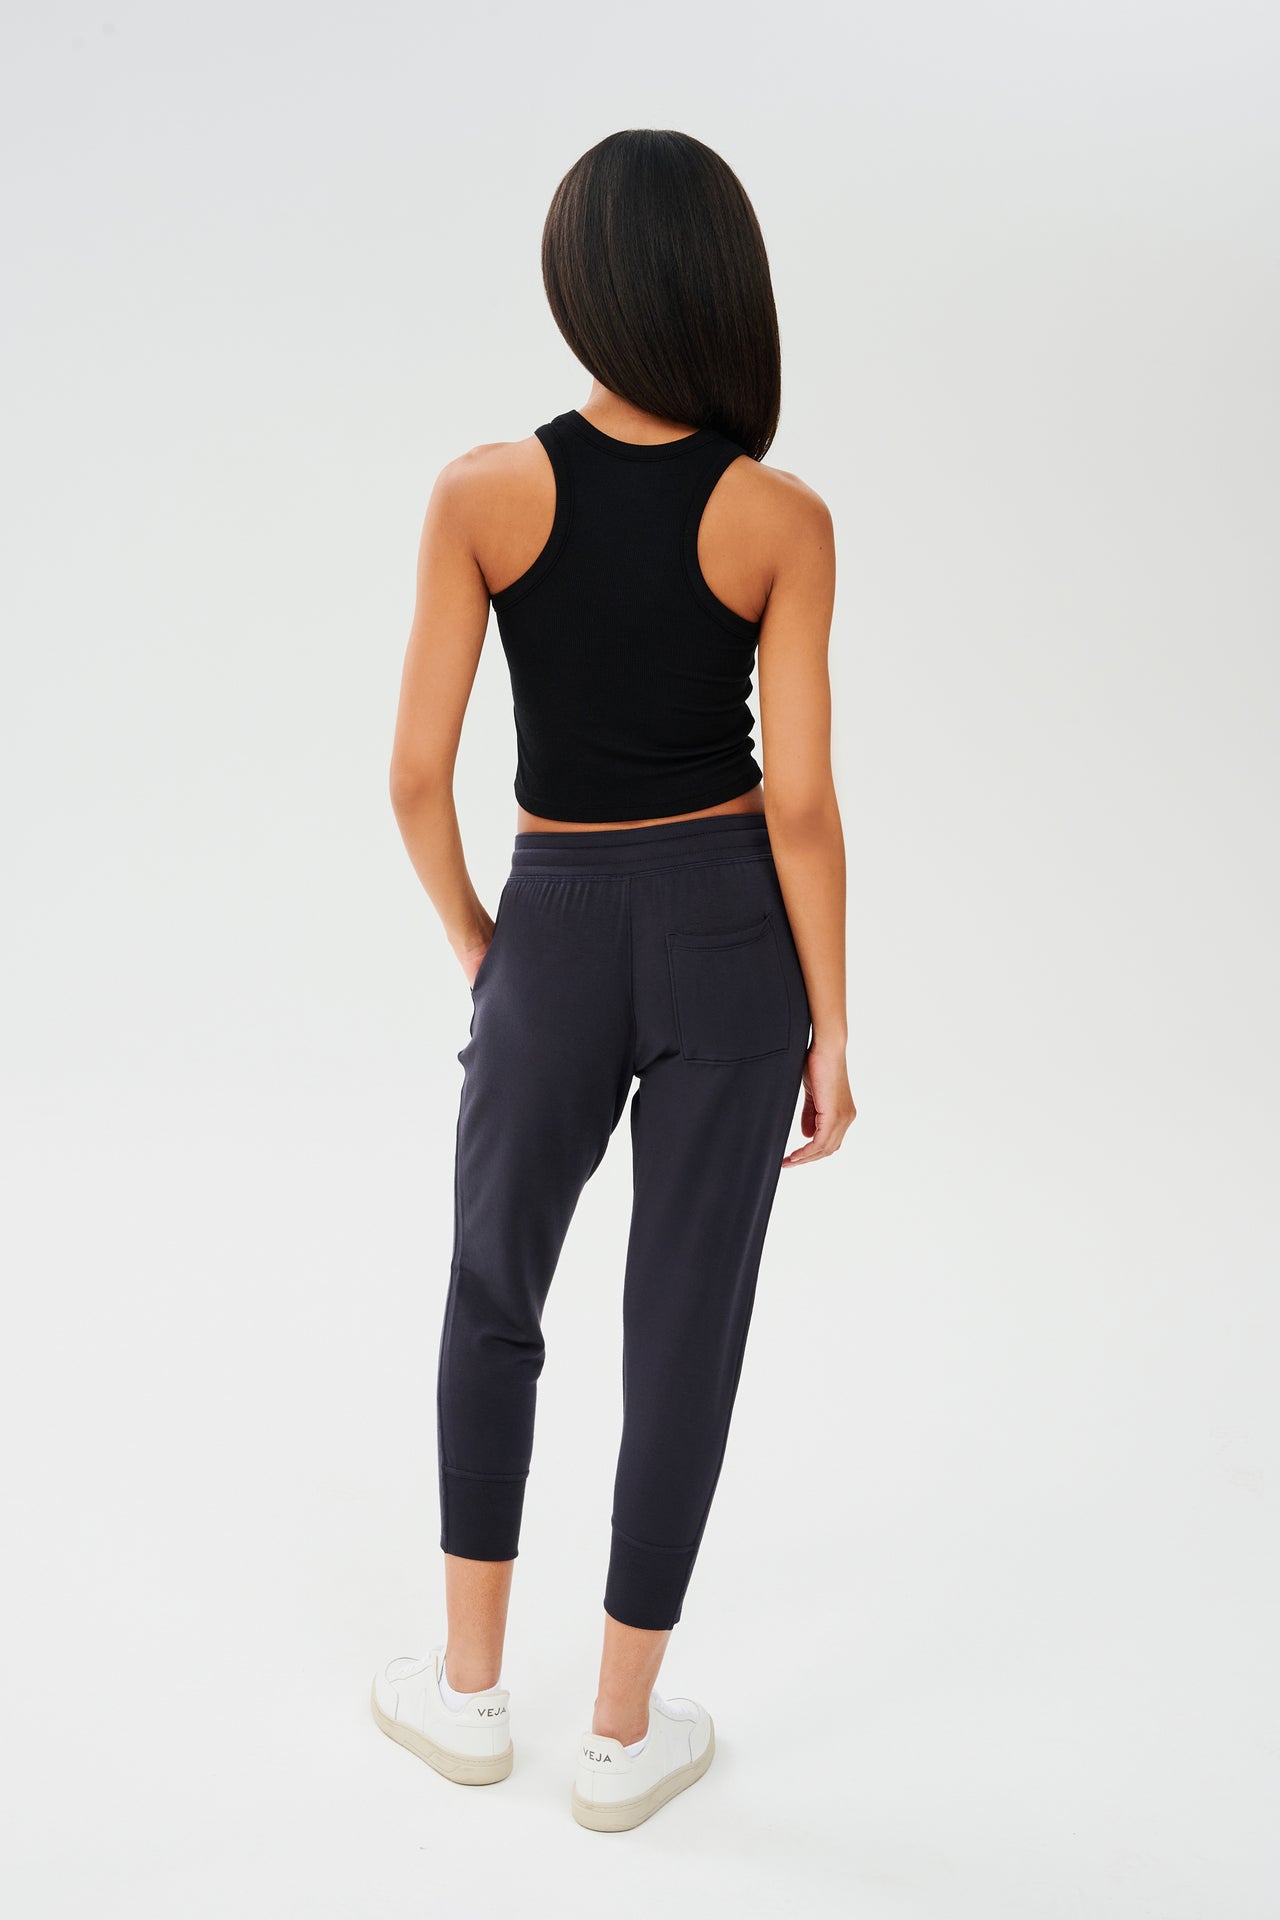 The back view of a woman wearing a SPLITS59 Kiki Rib Crop Tank - Black, designed for gym workouts, and black joggers.